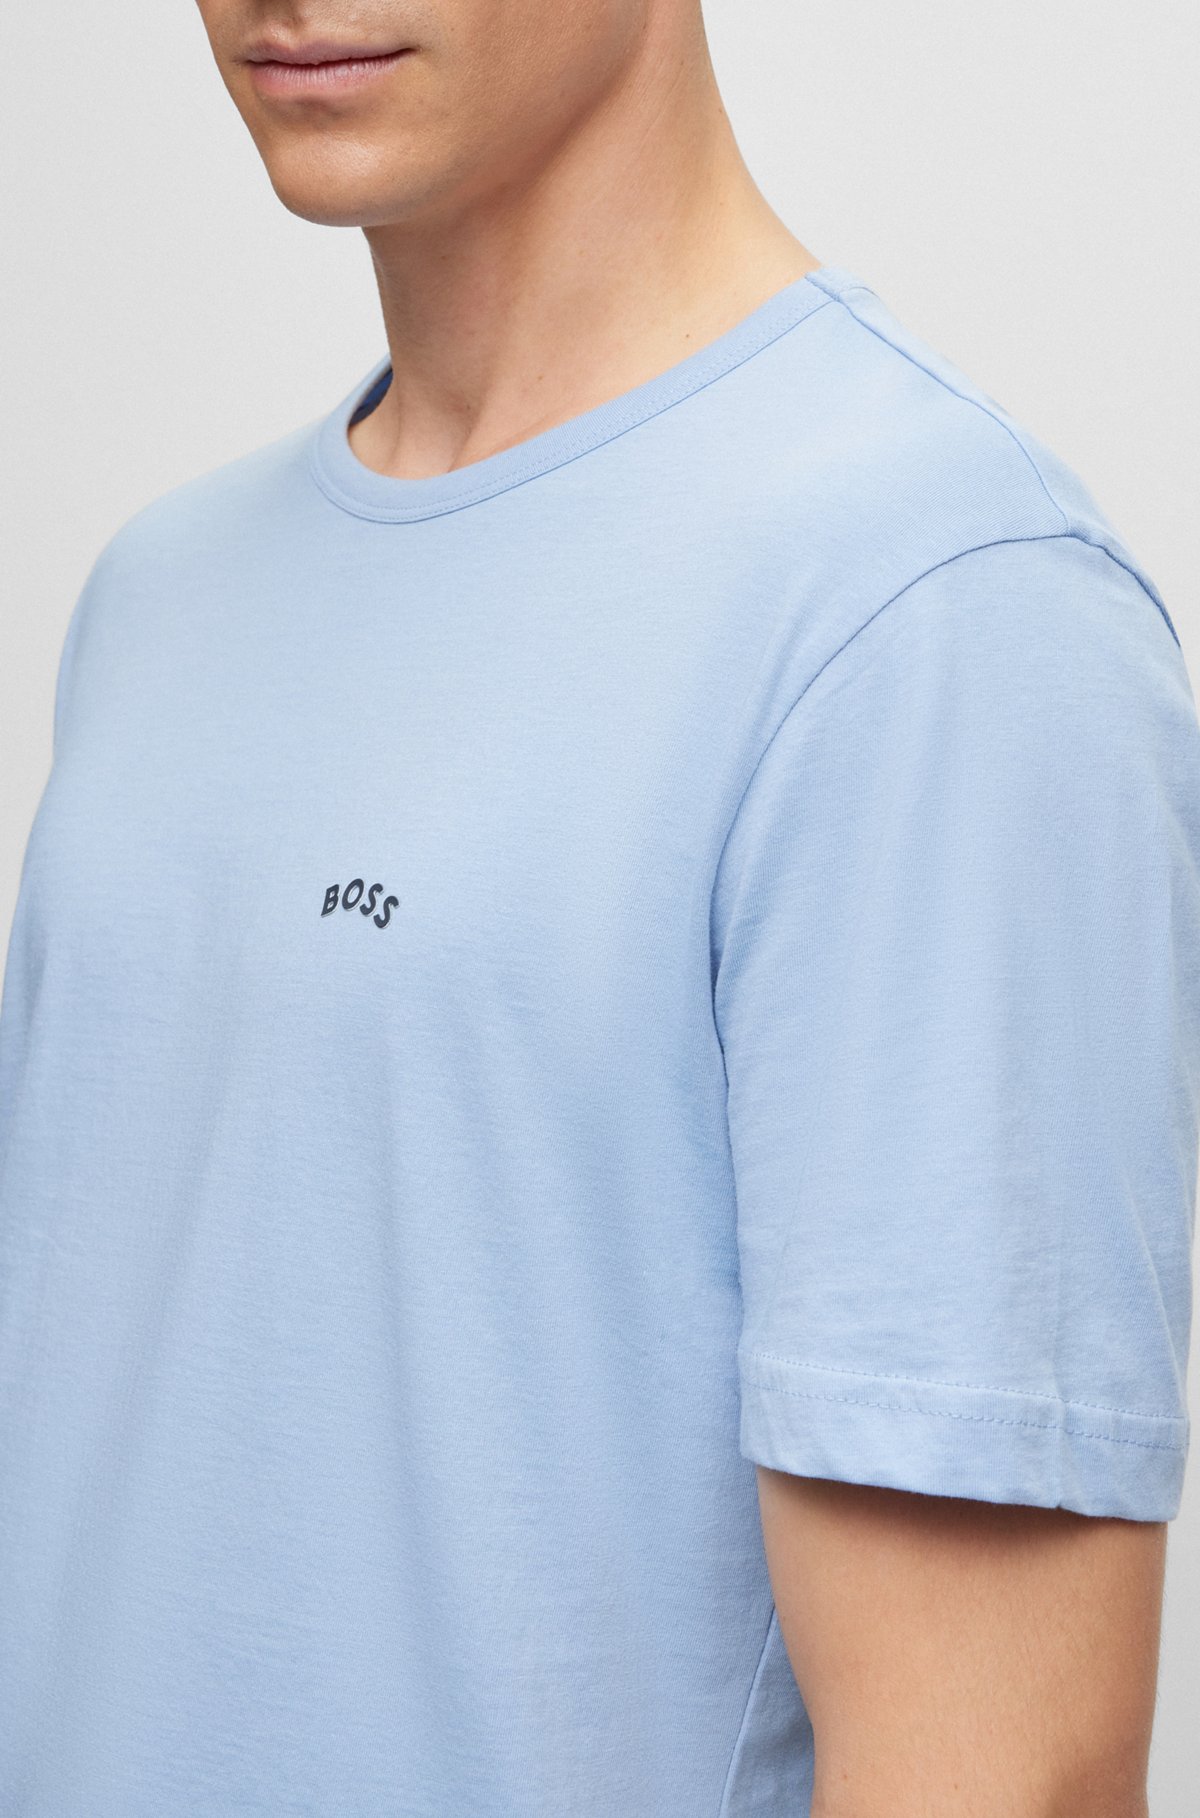 Organic-cotton T-shirt with curved logo, Light Blue